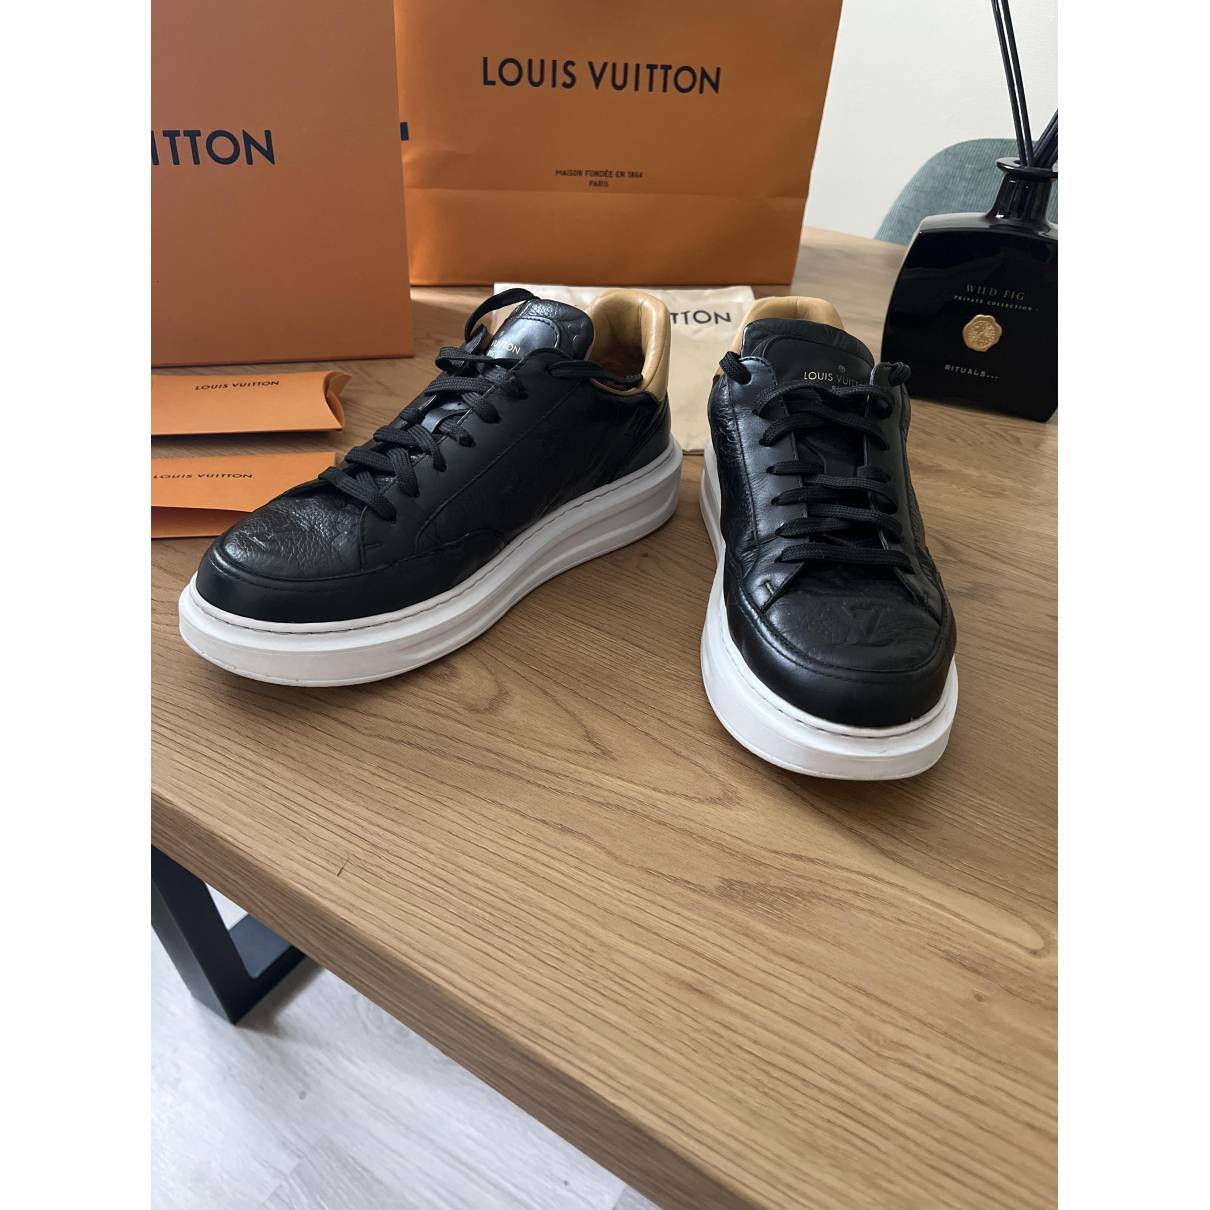 Louis Vuitton - Authenticated Beverly Hills Trainer - Leather Black Plain for Men, Very Good Condition